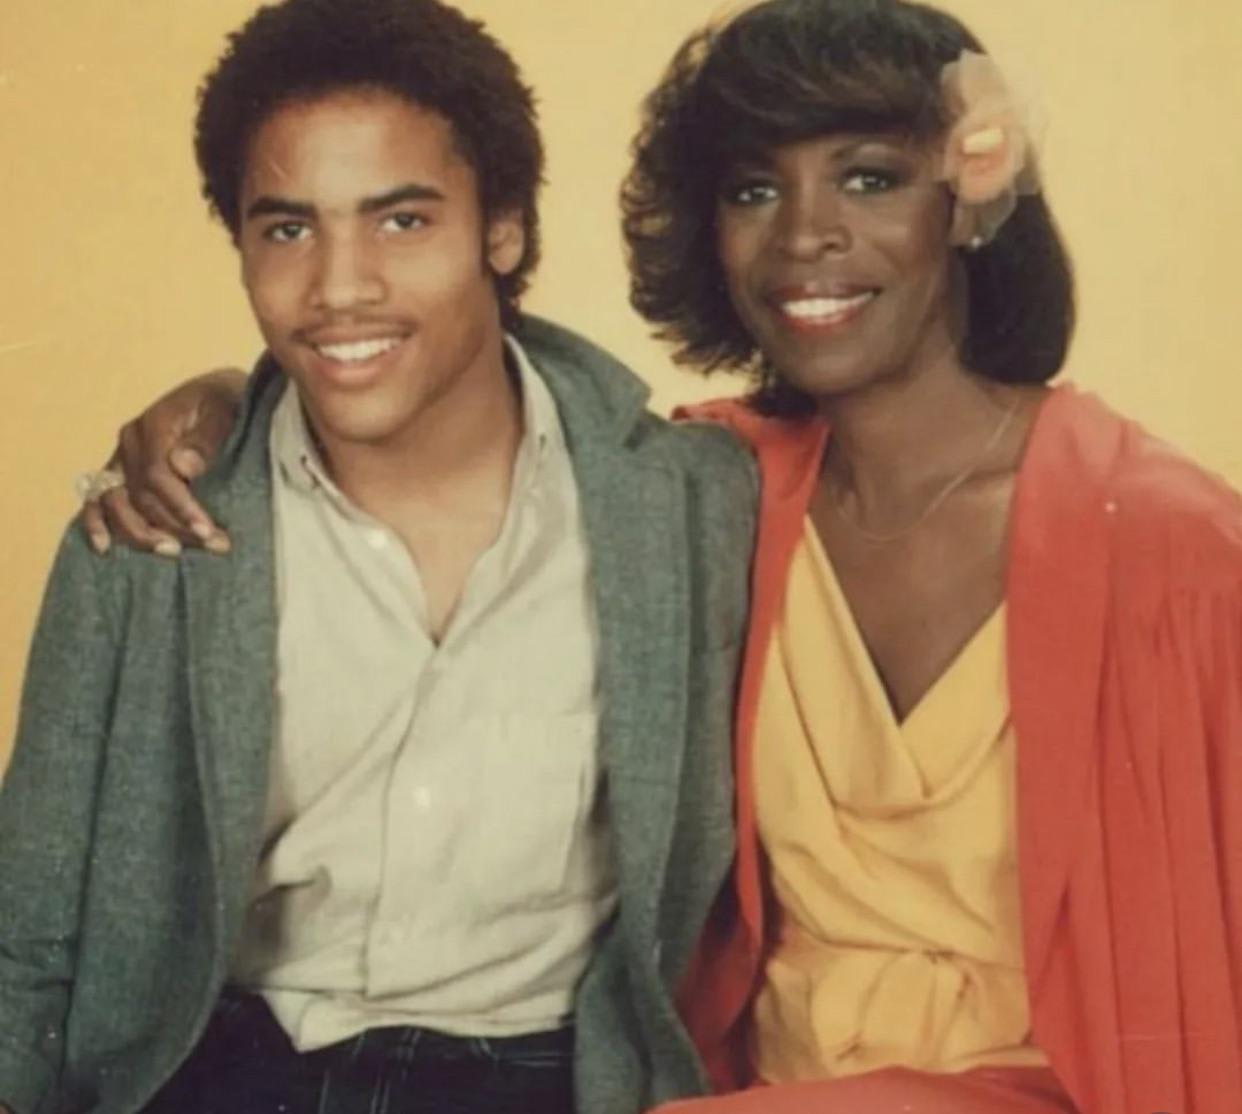 Lenny Kravitz and his mom Roxie Roker aka Helen from “The Jeffersons”, sometime in the 1980s.